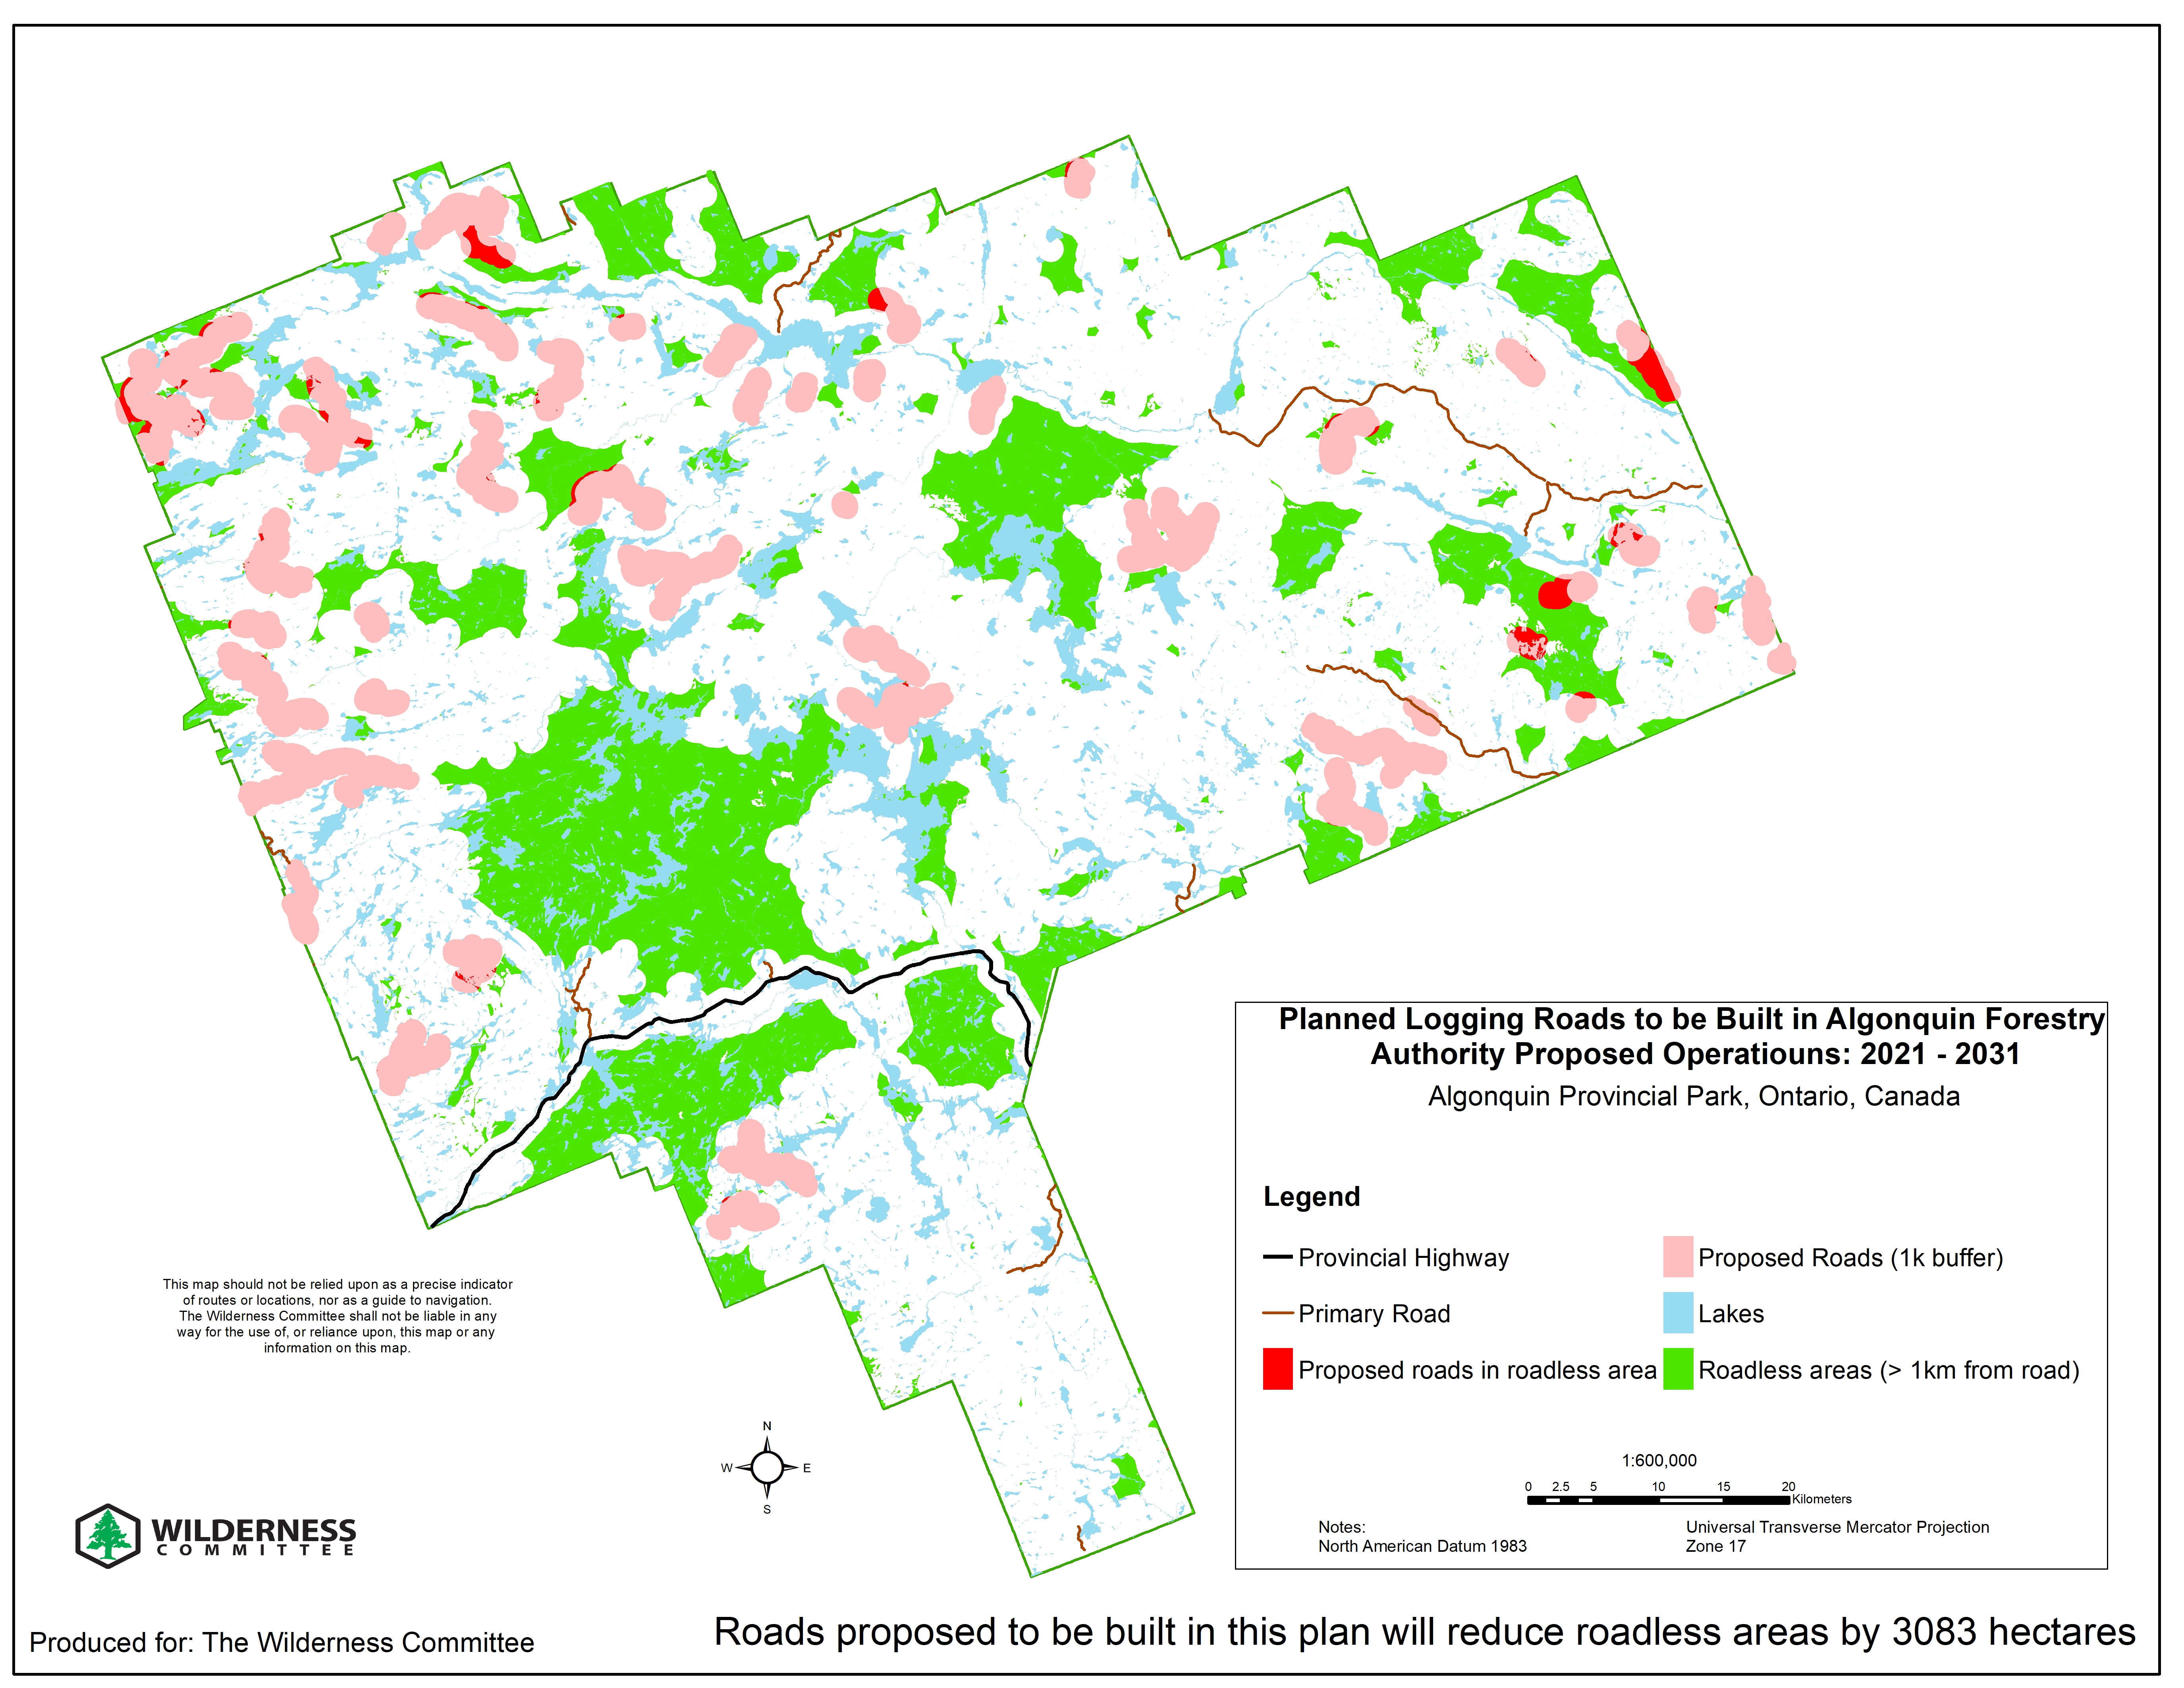 Planned logging roads to be build in Algonquin forestry authority proposed operations: 2021 - 2031